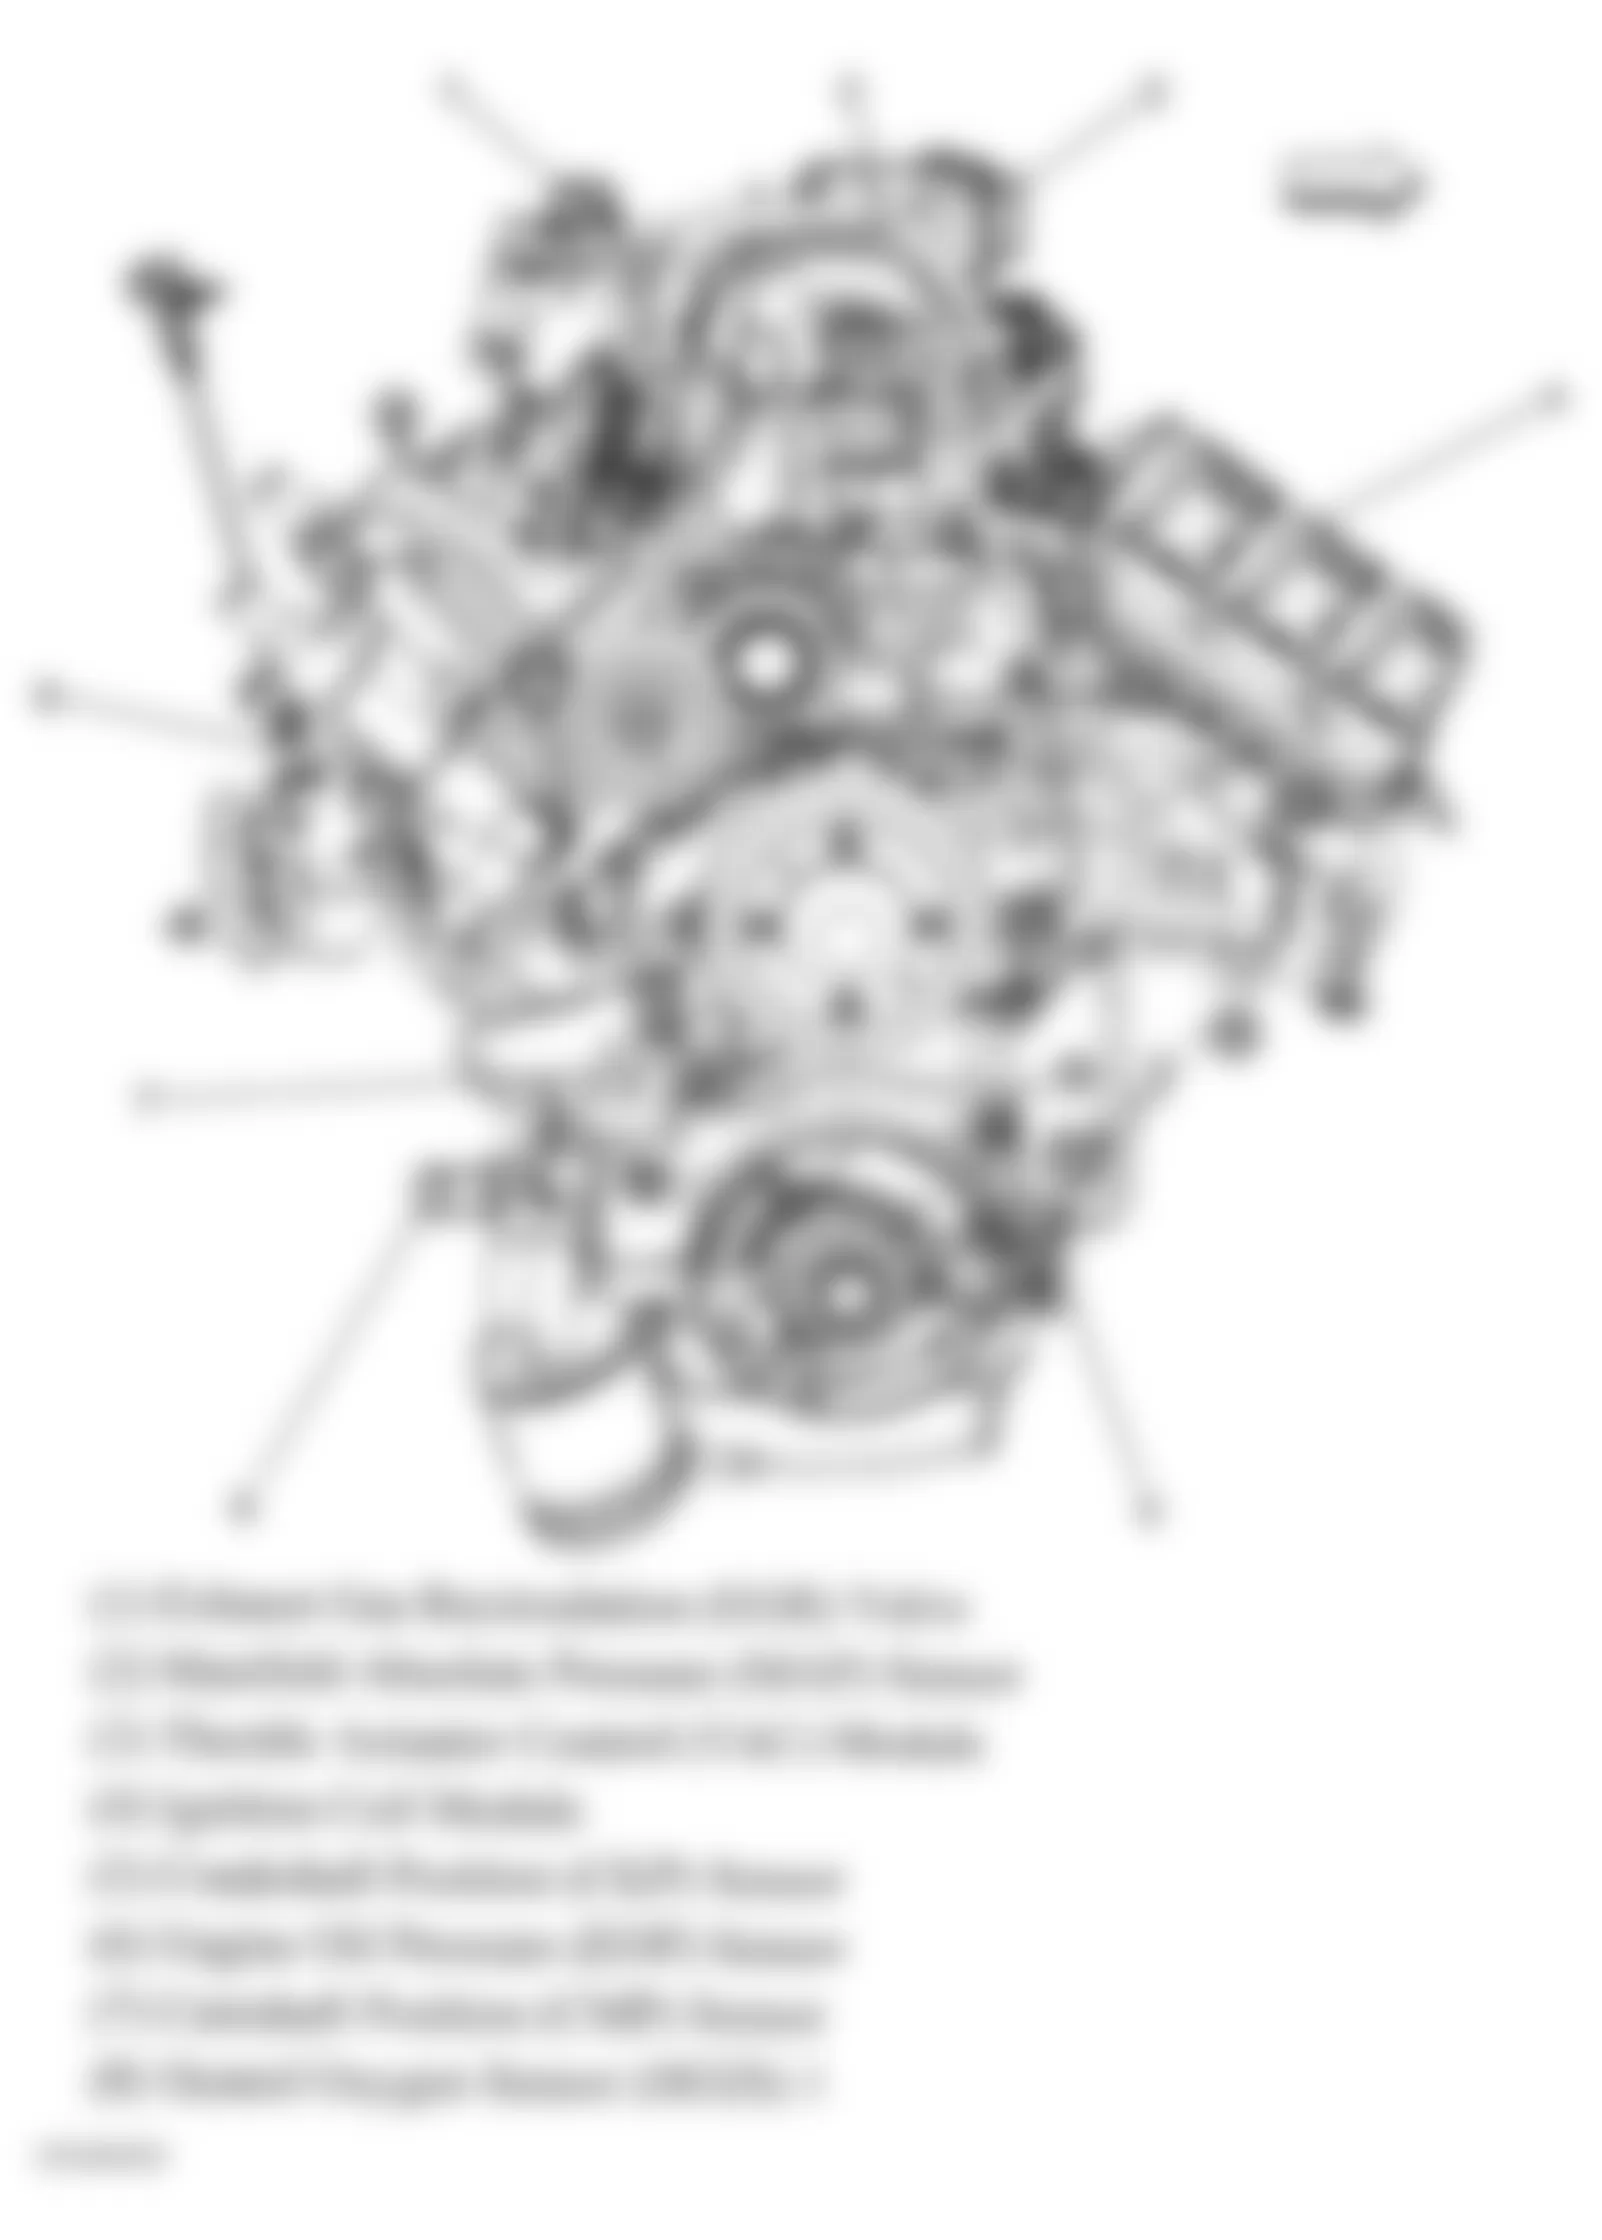 Buick LaCrosse CXS 2005 - Component Locations -  Front Of Engine (3.8L)